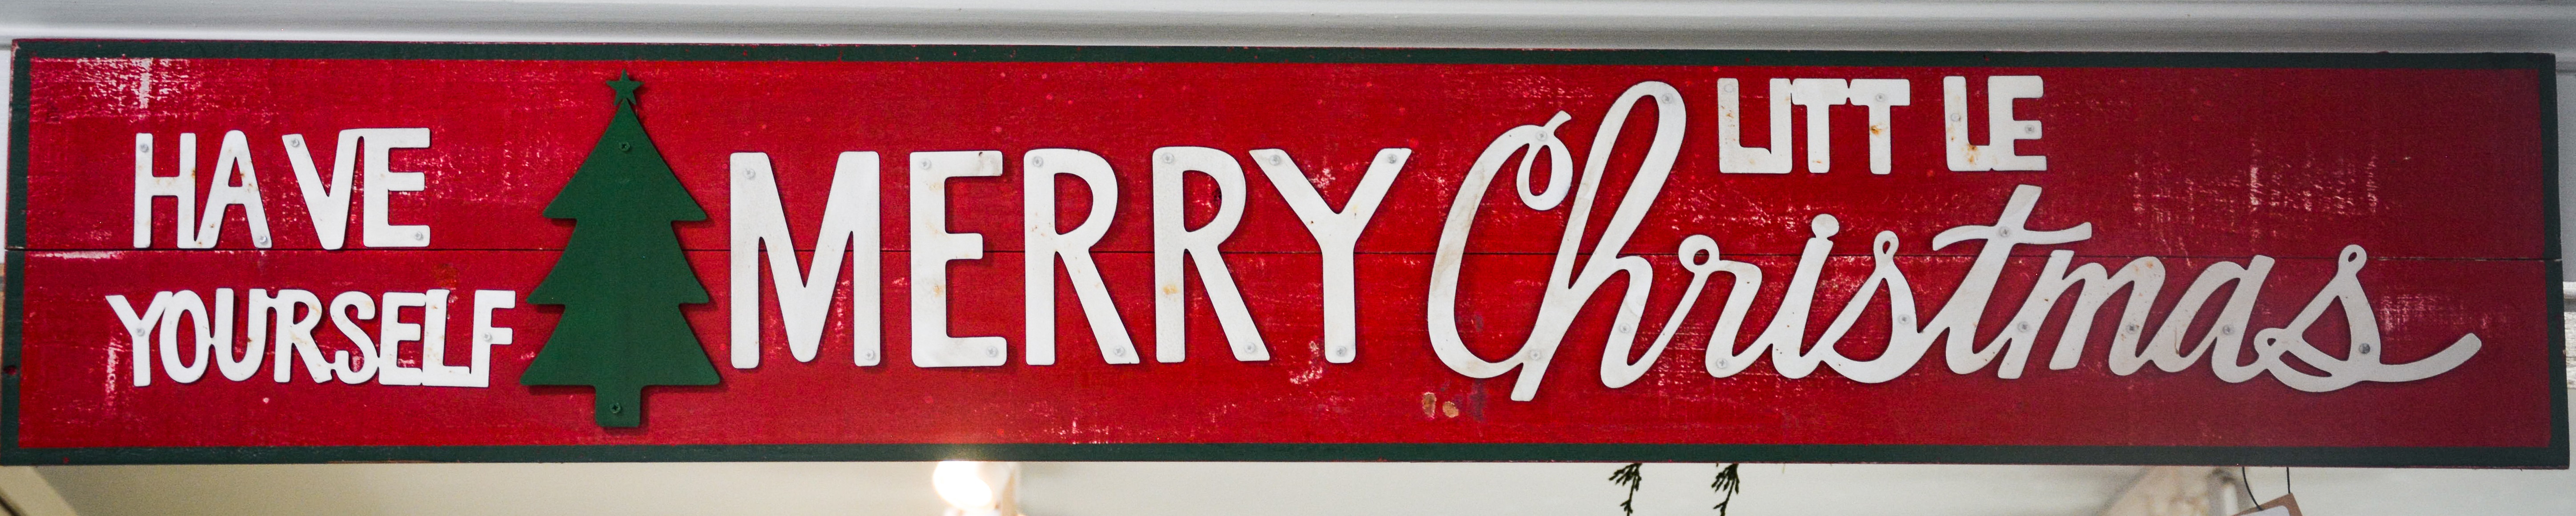 Hand painted red sign with white lettering that reads Have Yourself a Merry Little Christmas, where the letter A is a green Christmas tree.